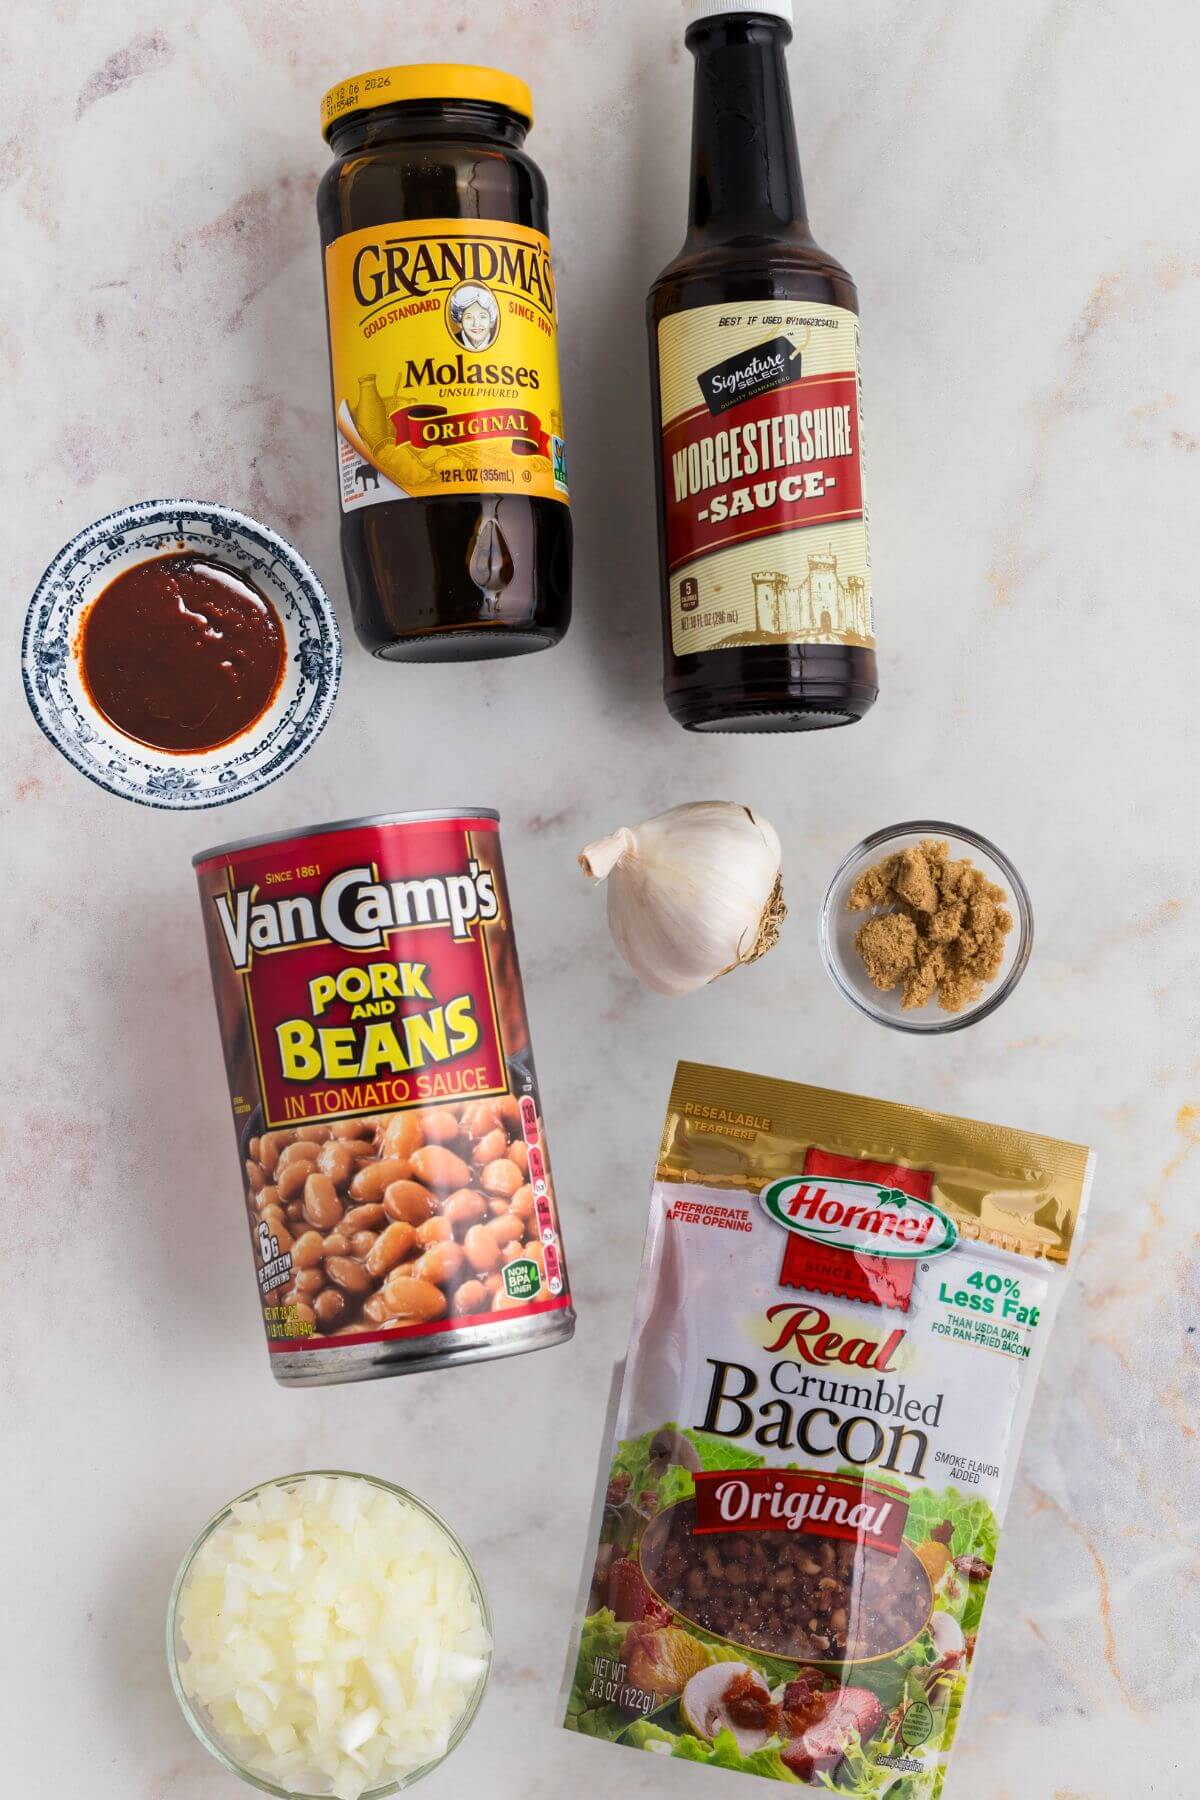 Ingredients of molasses, pork and beans, chopped onions, crumbled bacon, and more, needed to make baked beans from scratch on a marble table. 